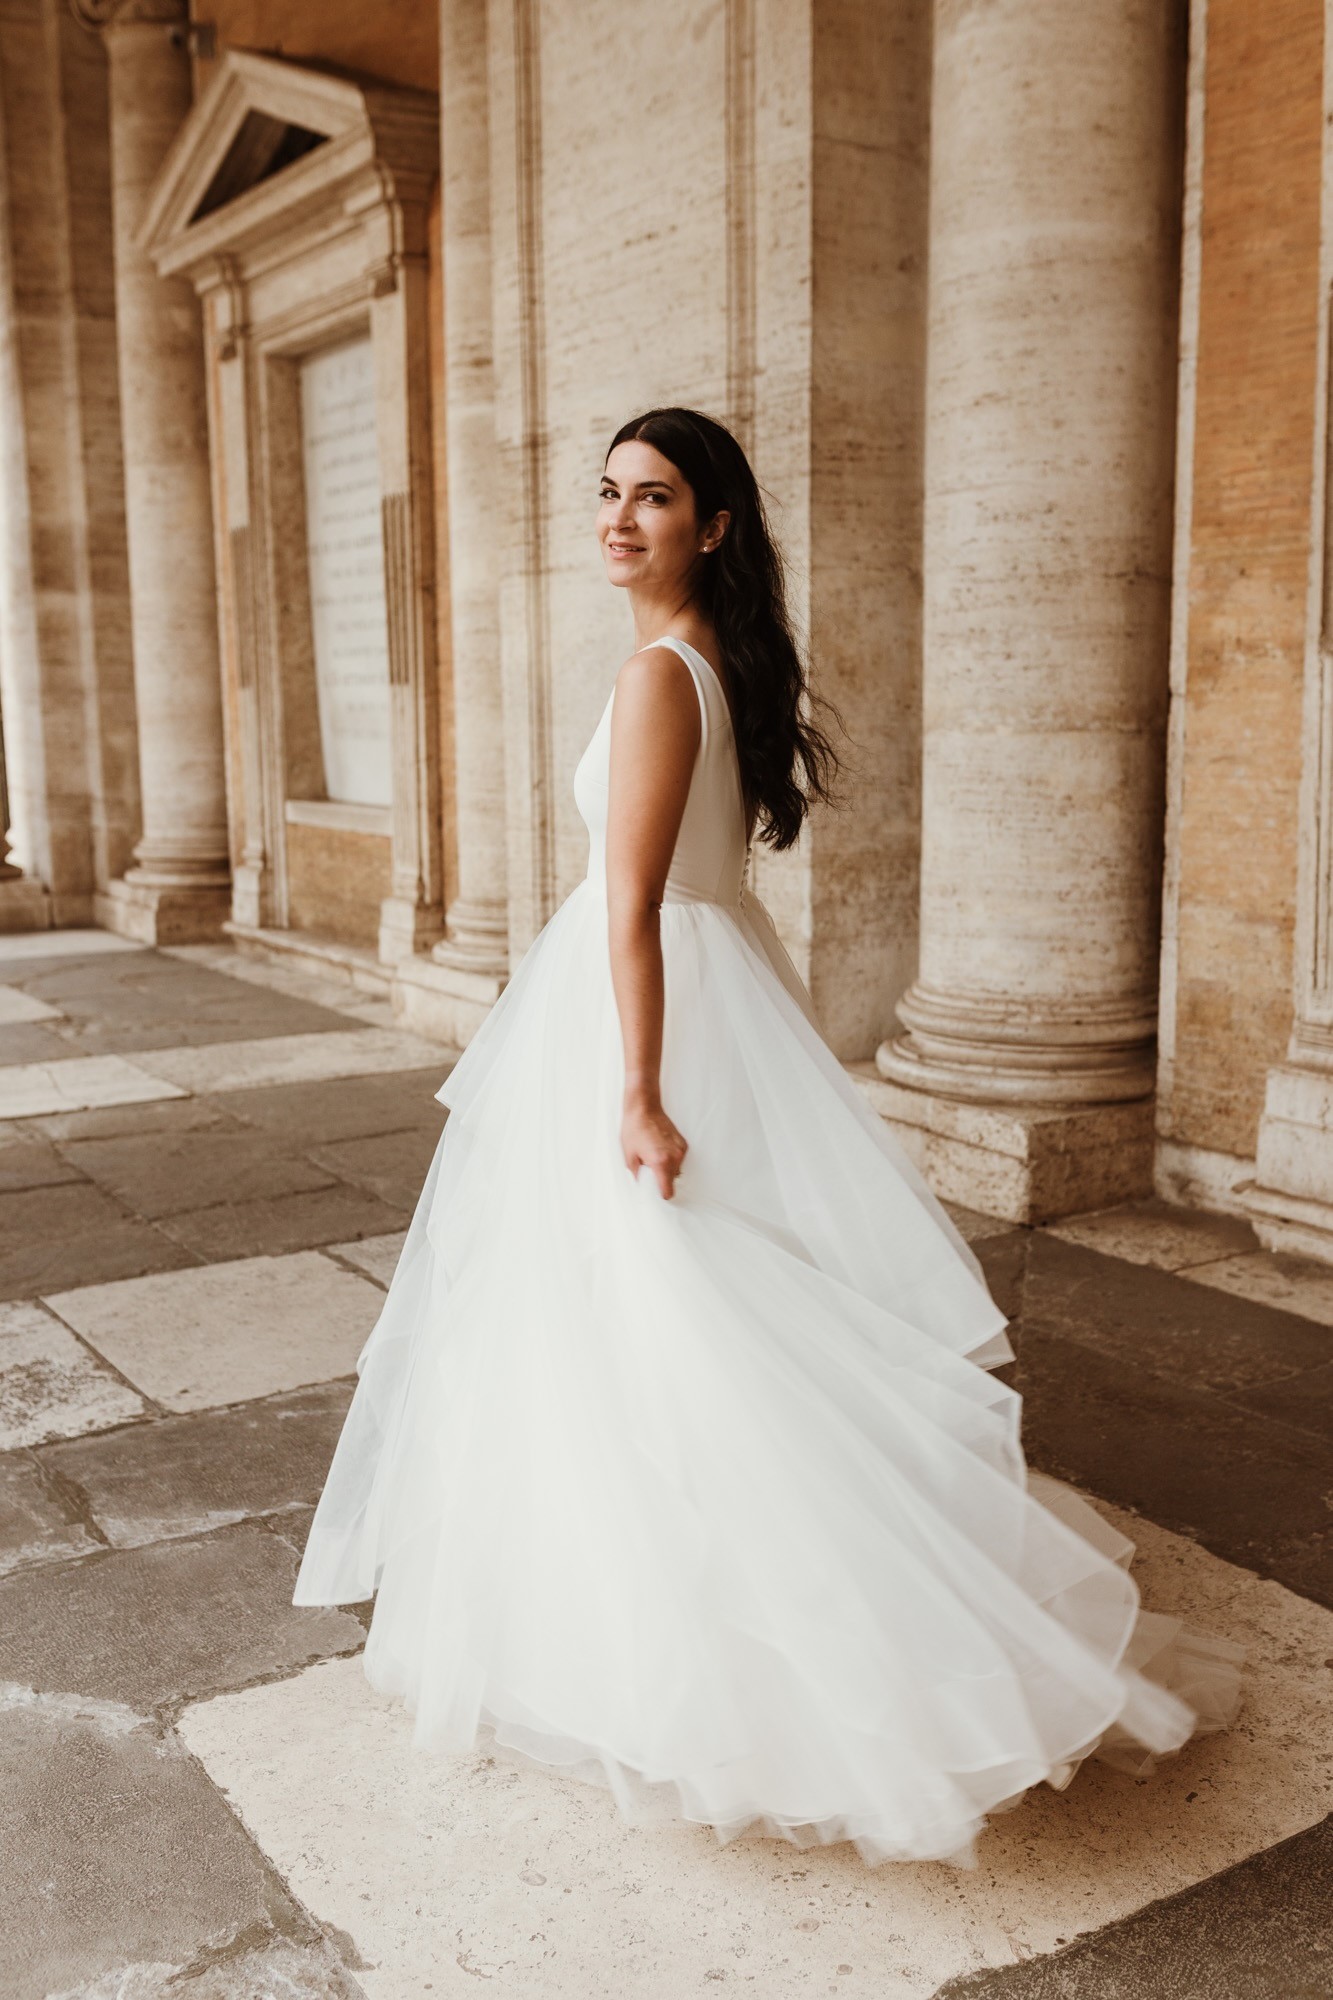 Bride Wearing Simple Wedding Dresses Called Fatima By Maggie Sottero